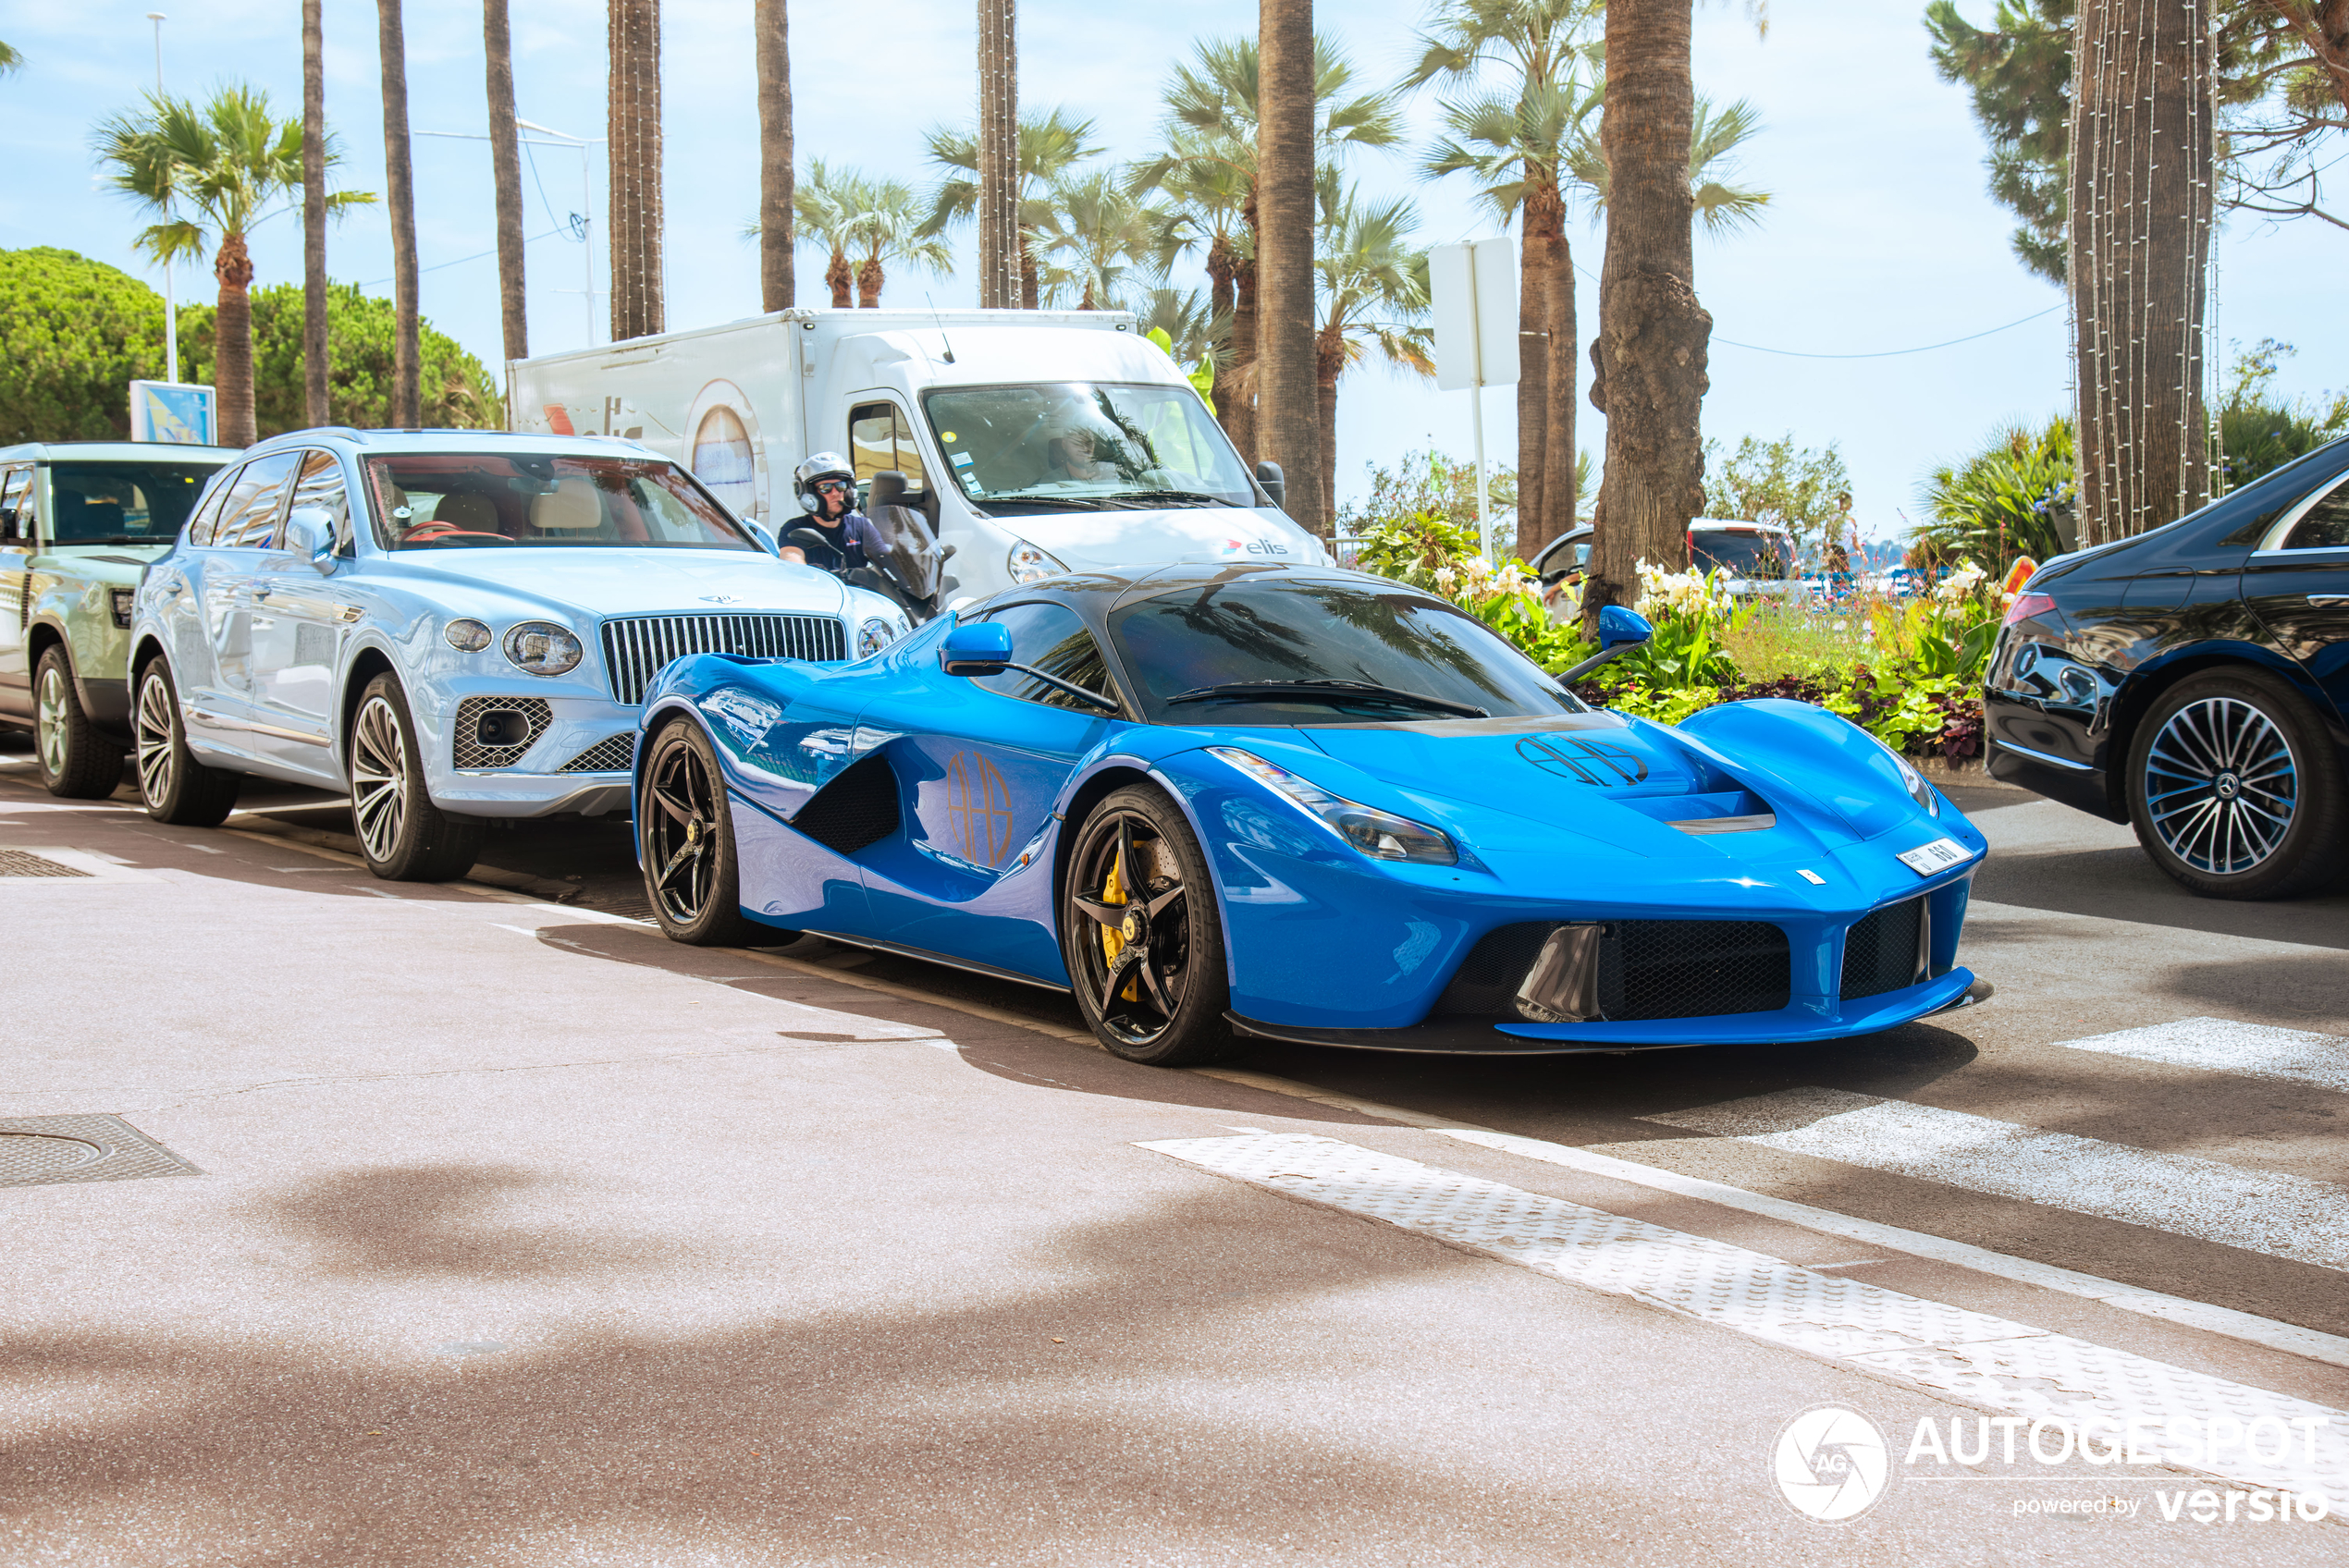 A beautiful Laferrari shows up in Cannes